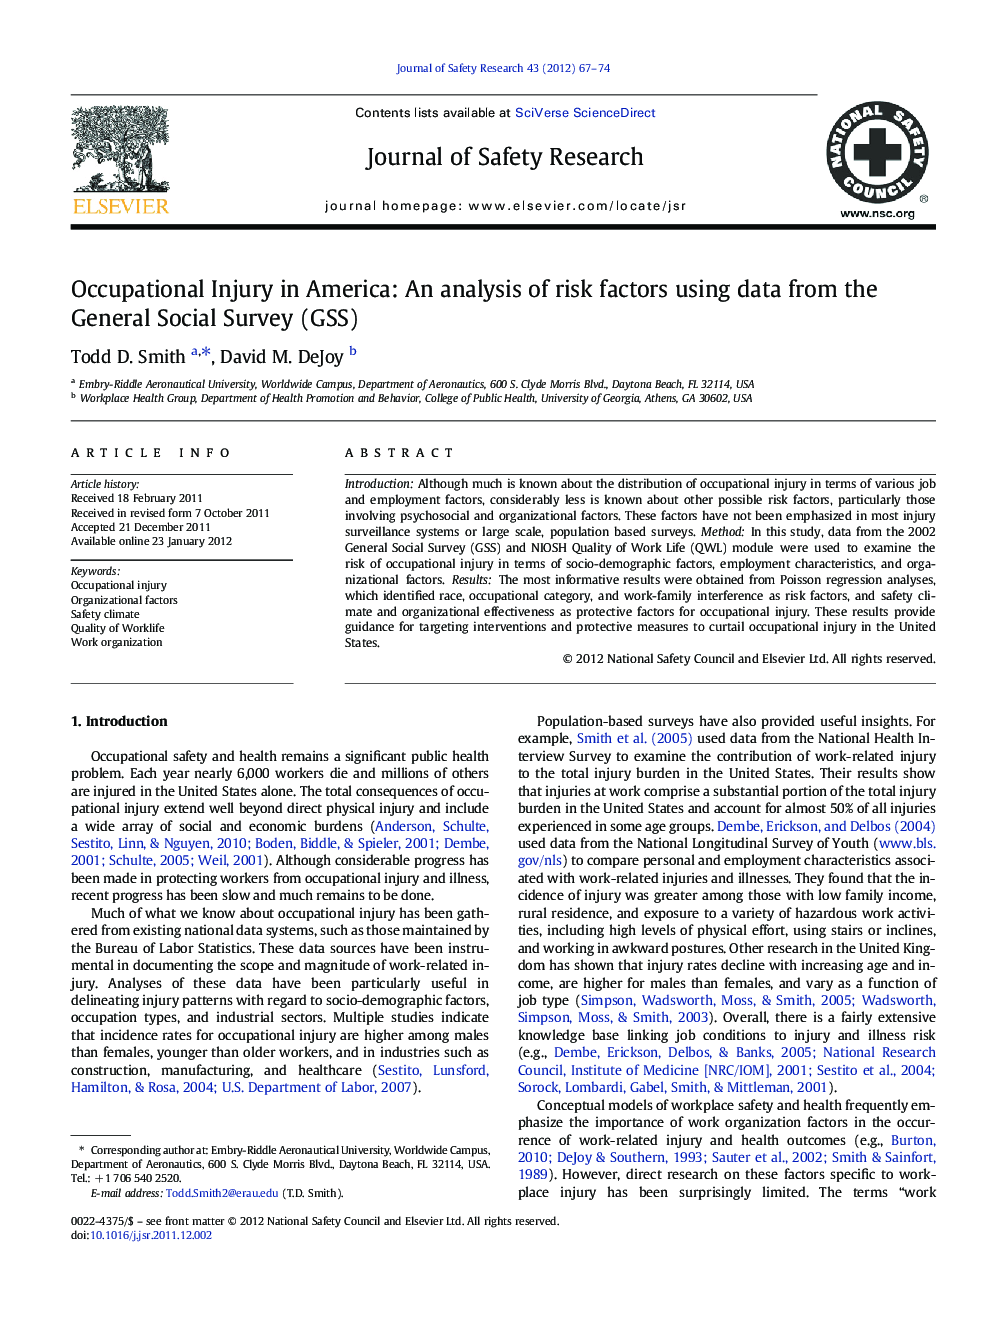 Occupational Injury in America: An analysis of risk factors using data from the General Social Survey (GSS)